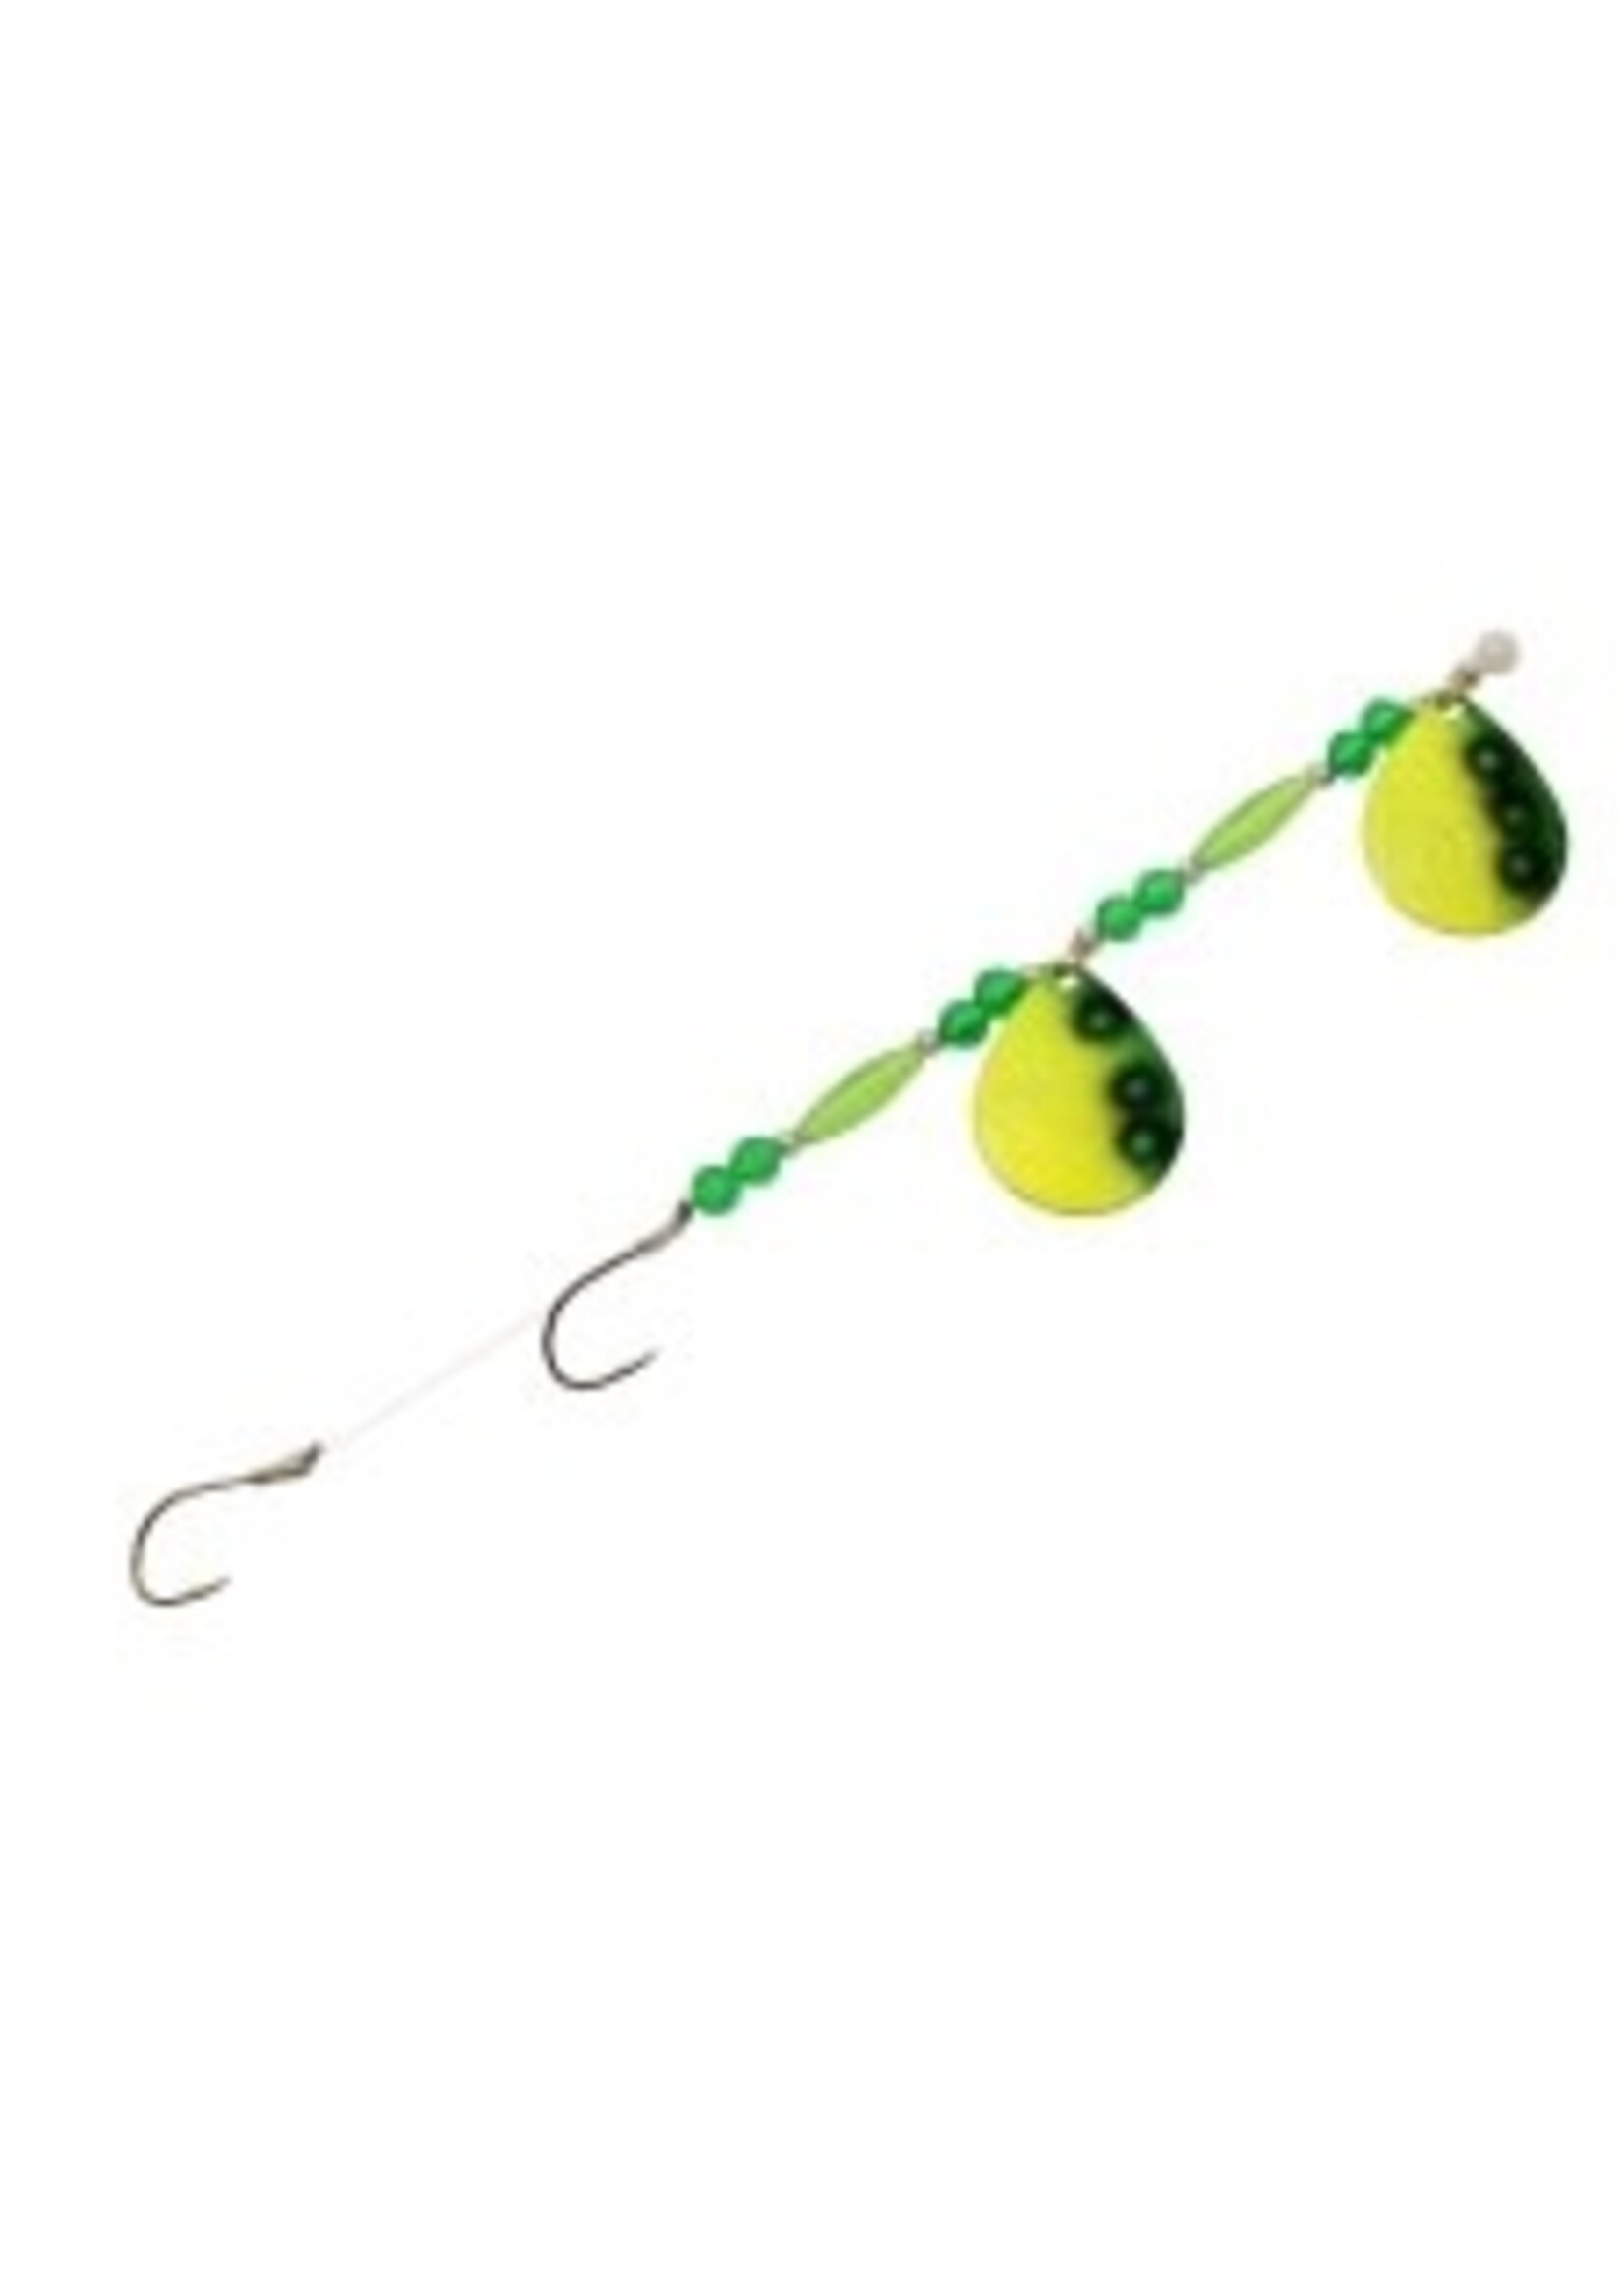 Challenger Lures 3D Worm Harness Bottom Bouncing Rig - Willow - #4 - U.V. Pink Panties